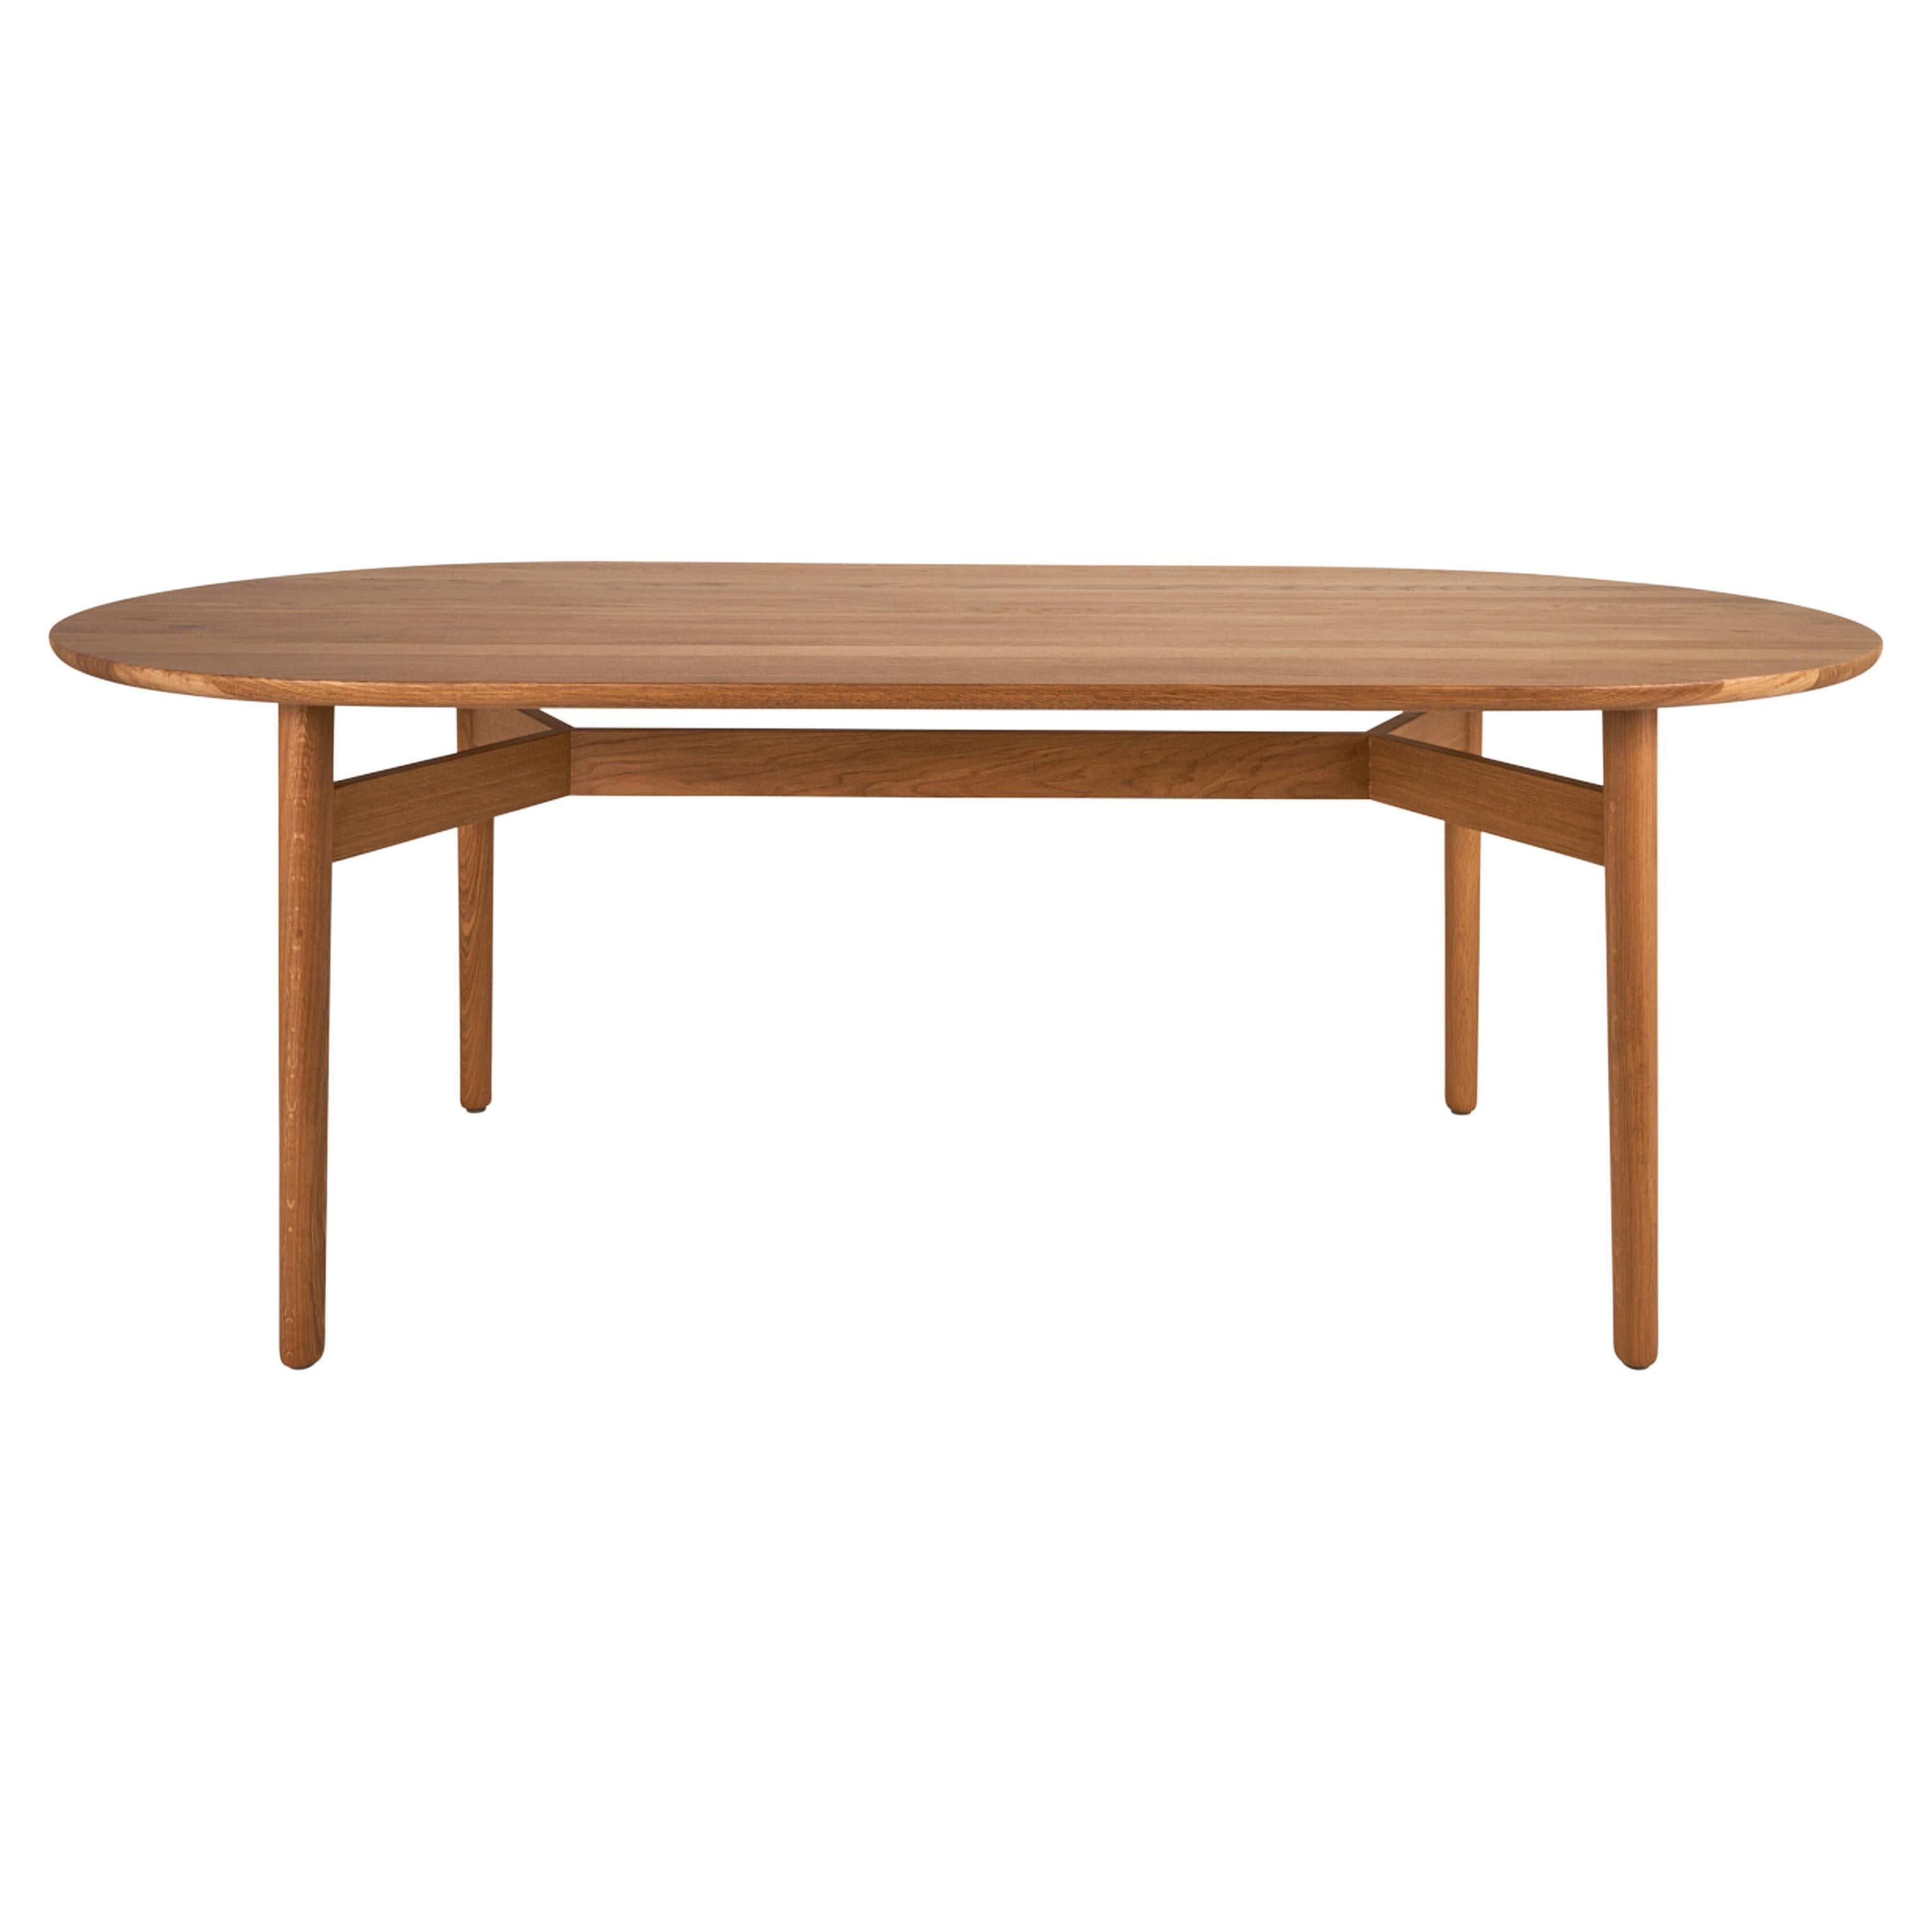 Schumacher Editions Puffin 84" Dining Table in Natural Matte